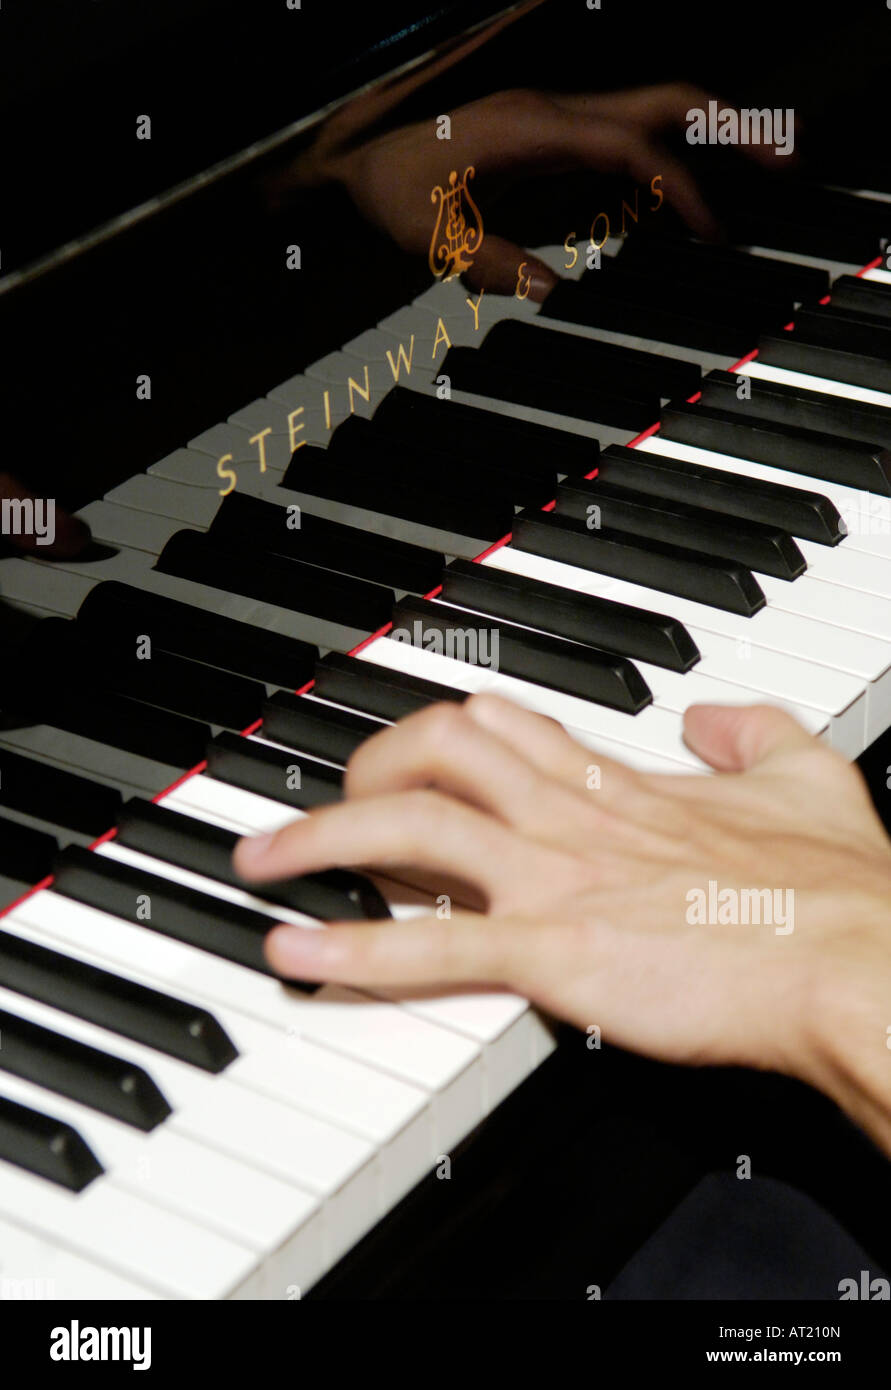 playing a steinway piano Stock Photo